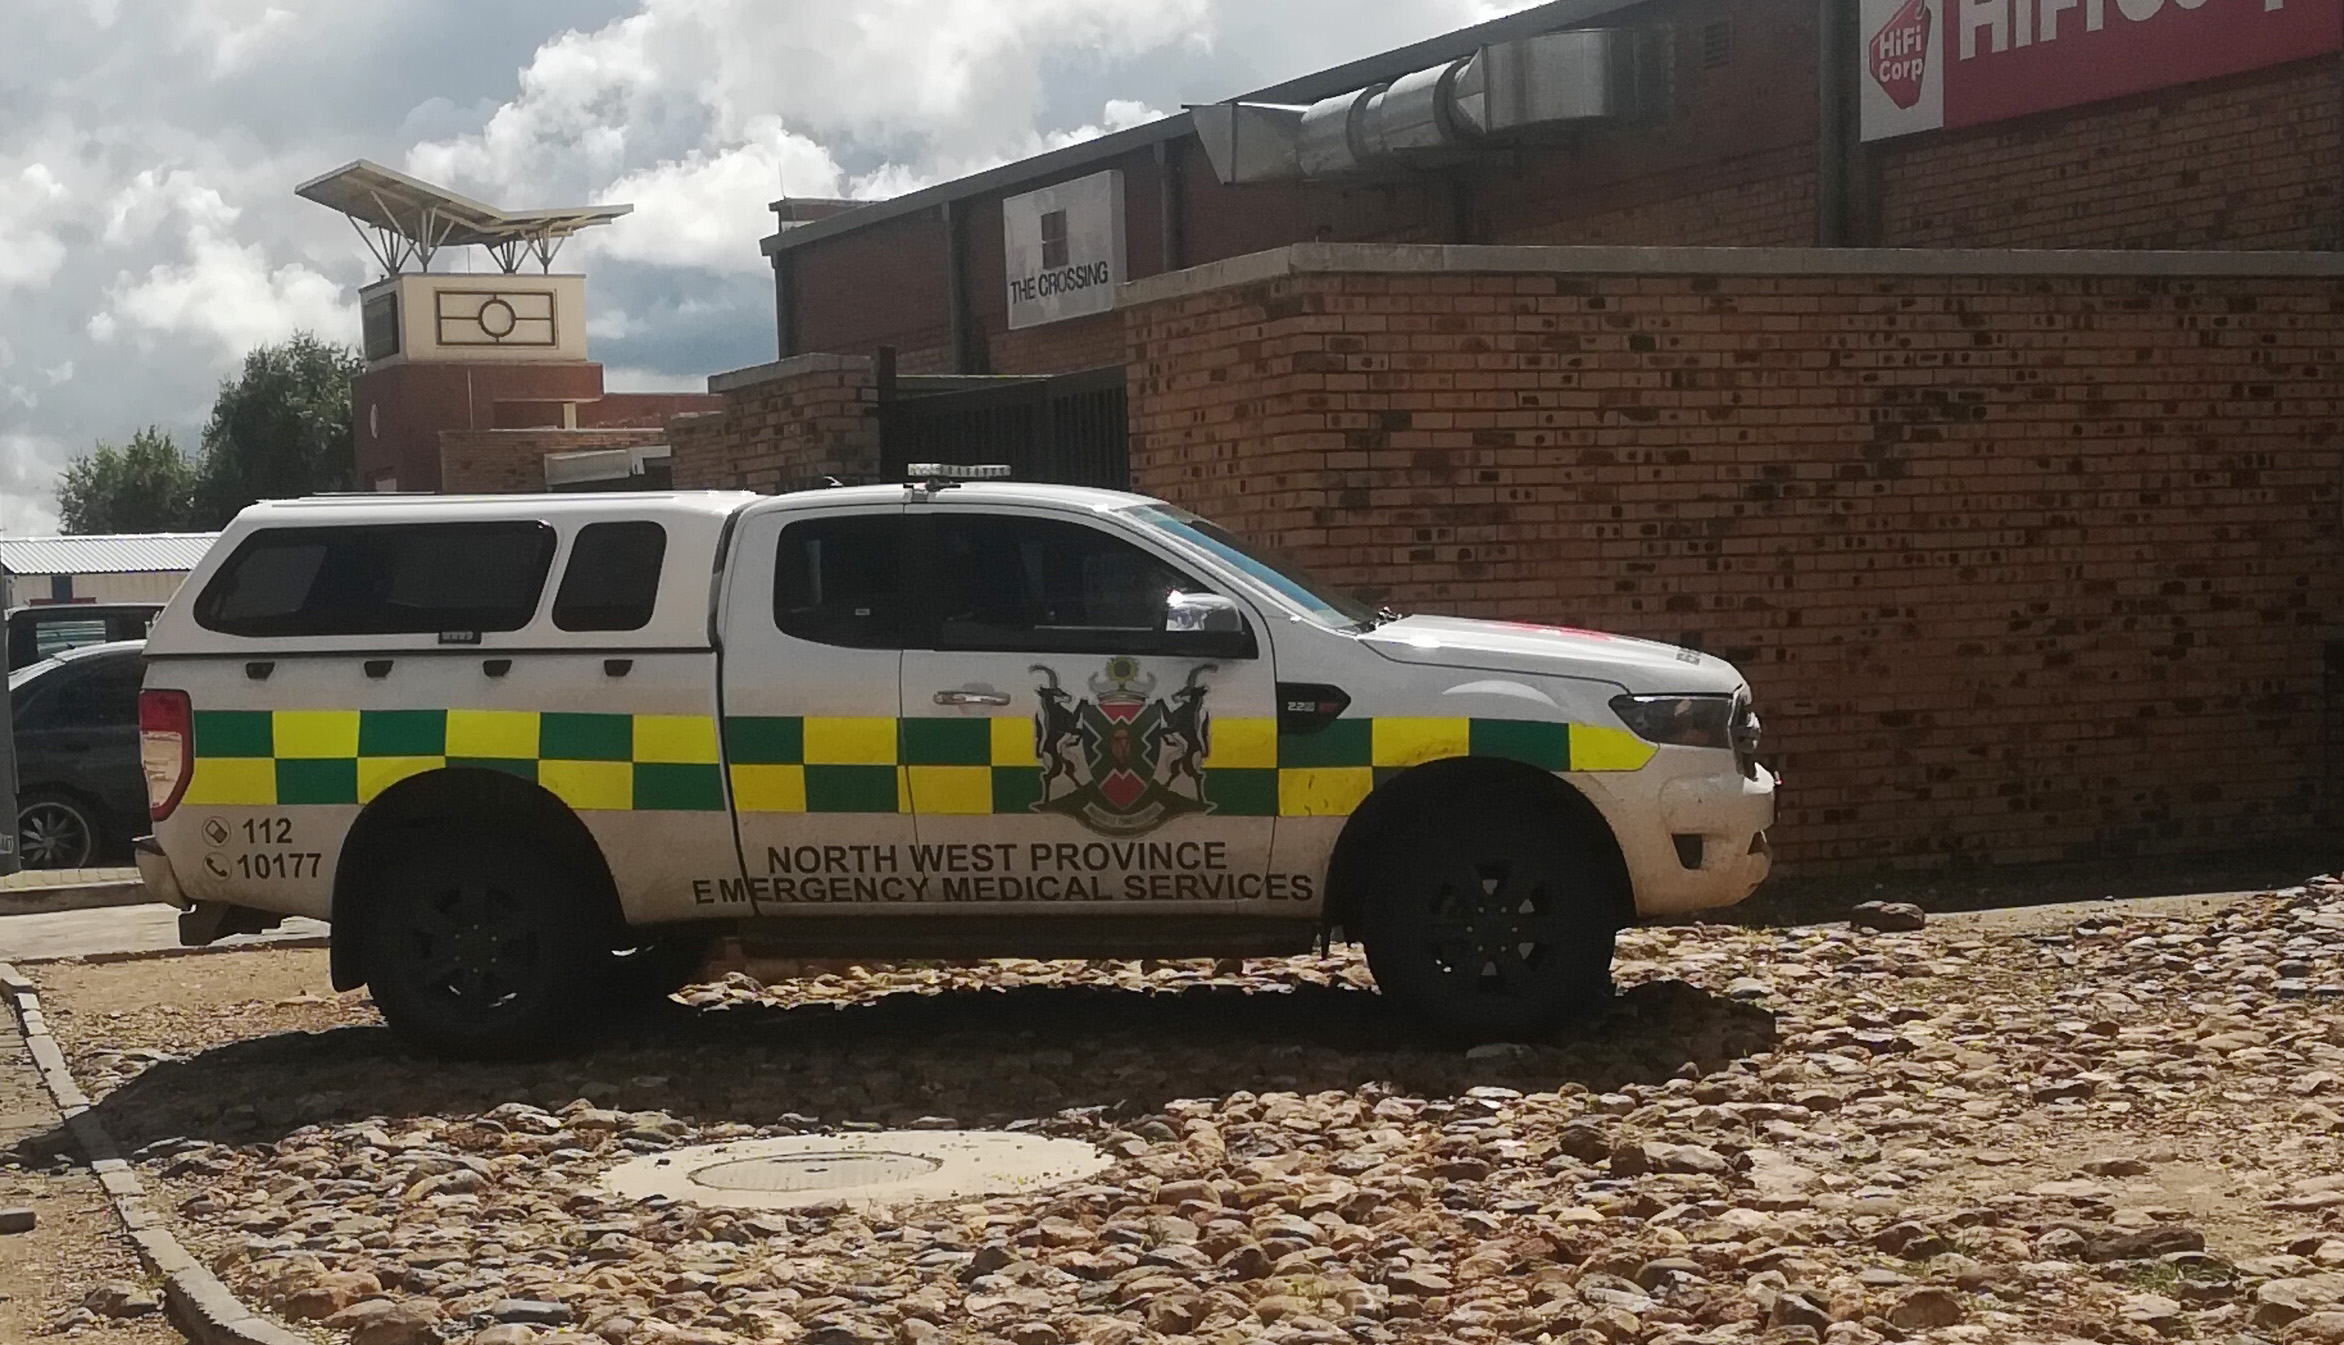 Rural healthcare - A parked EMS vehicle